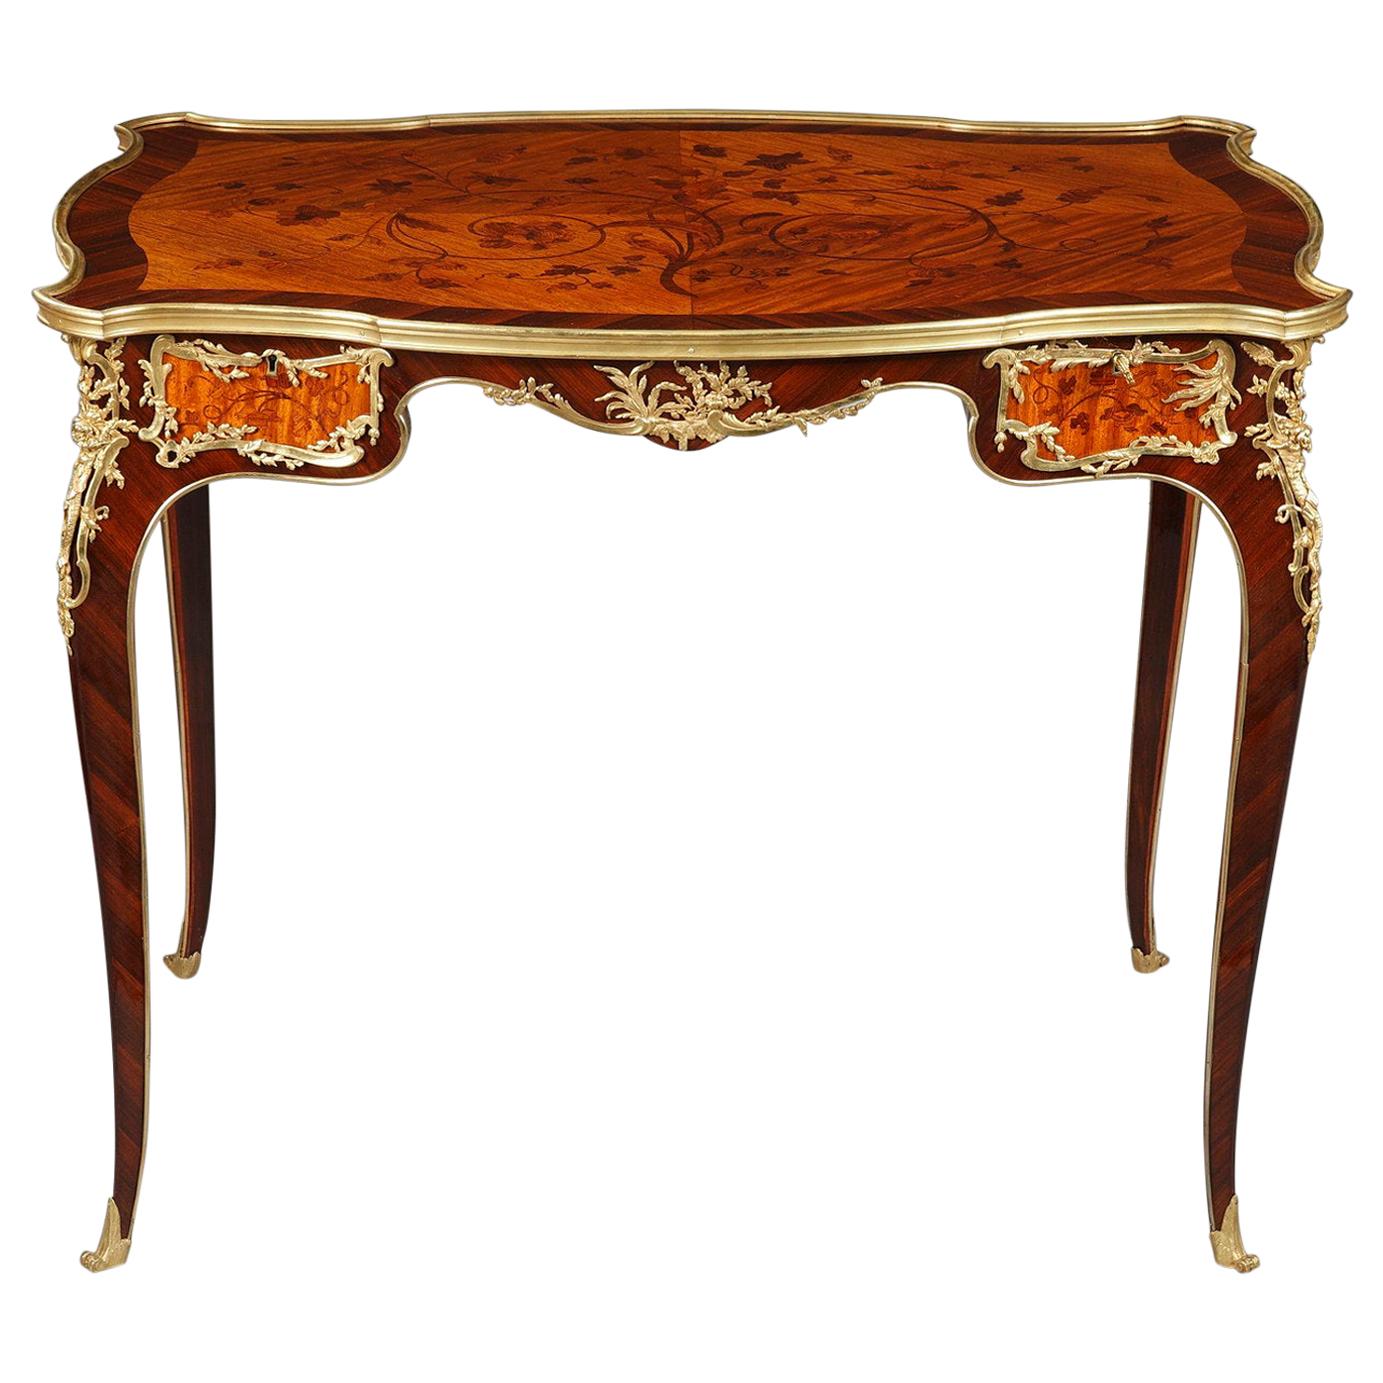 Louis XV Style Table Attributed to J.E. Zwiener, France, circa 1880